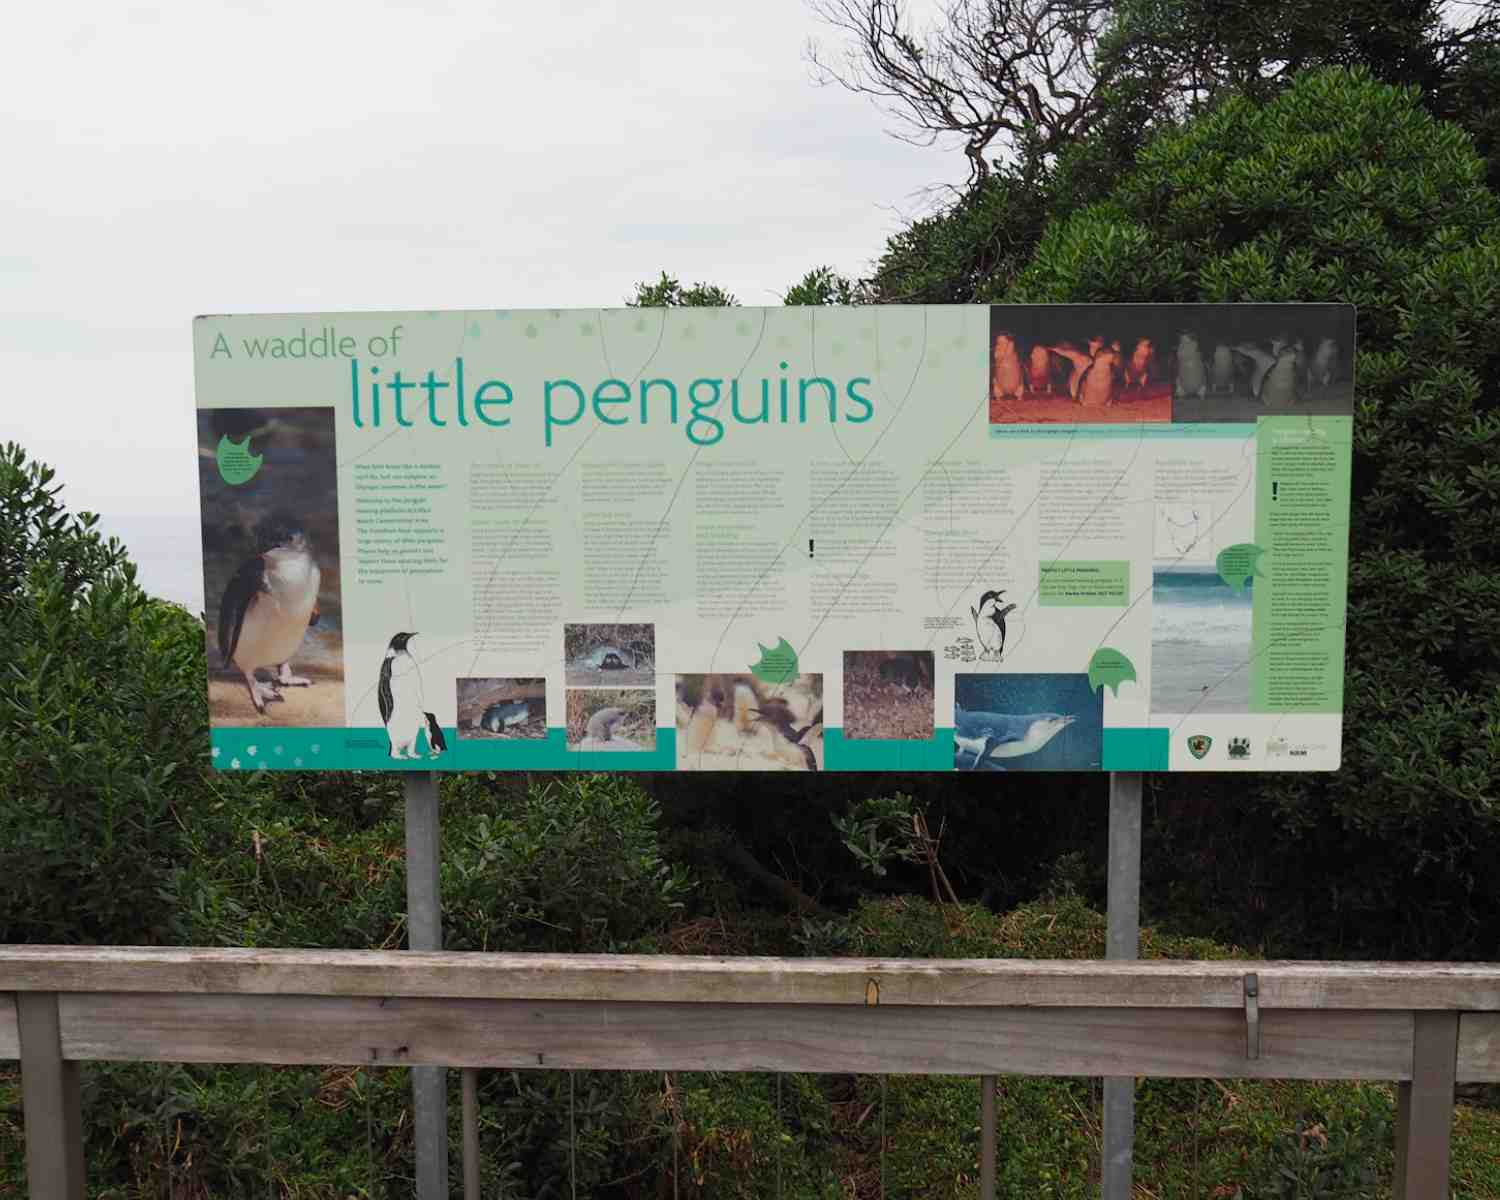 The best place to find penguins in Tasmania